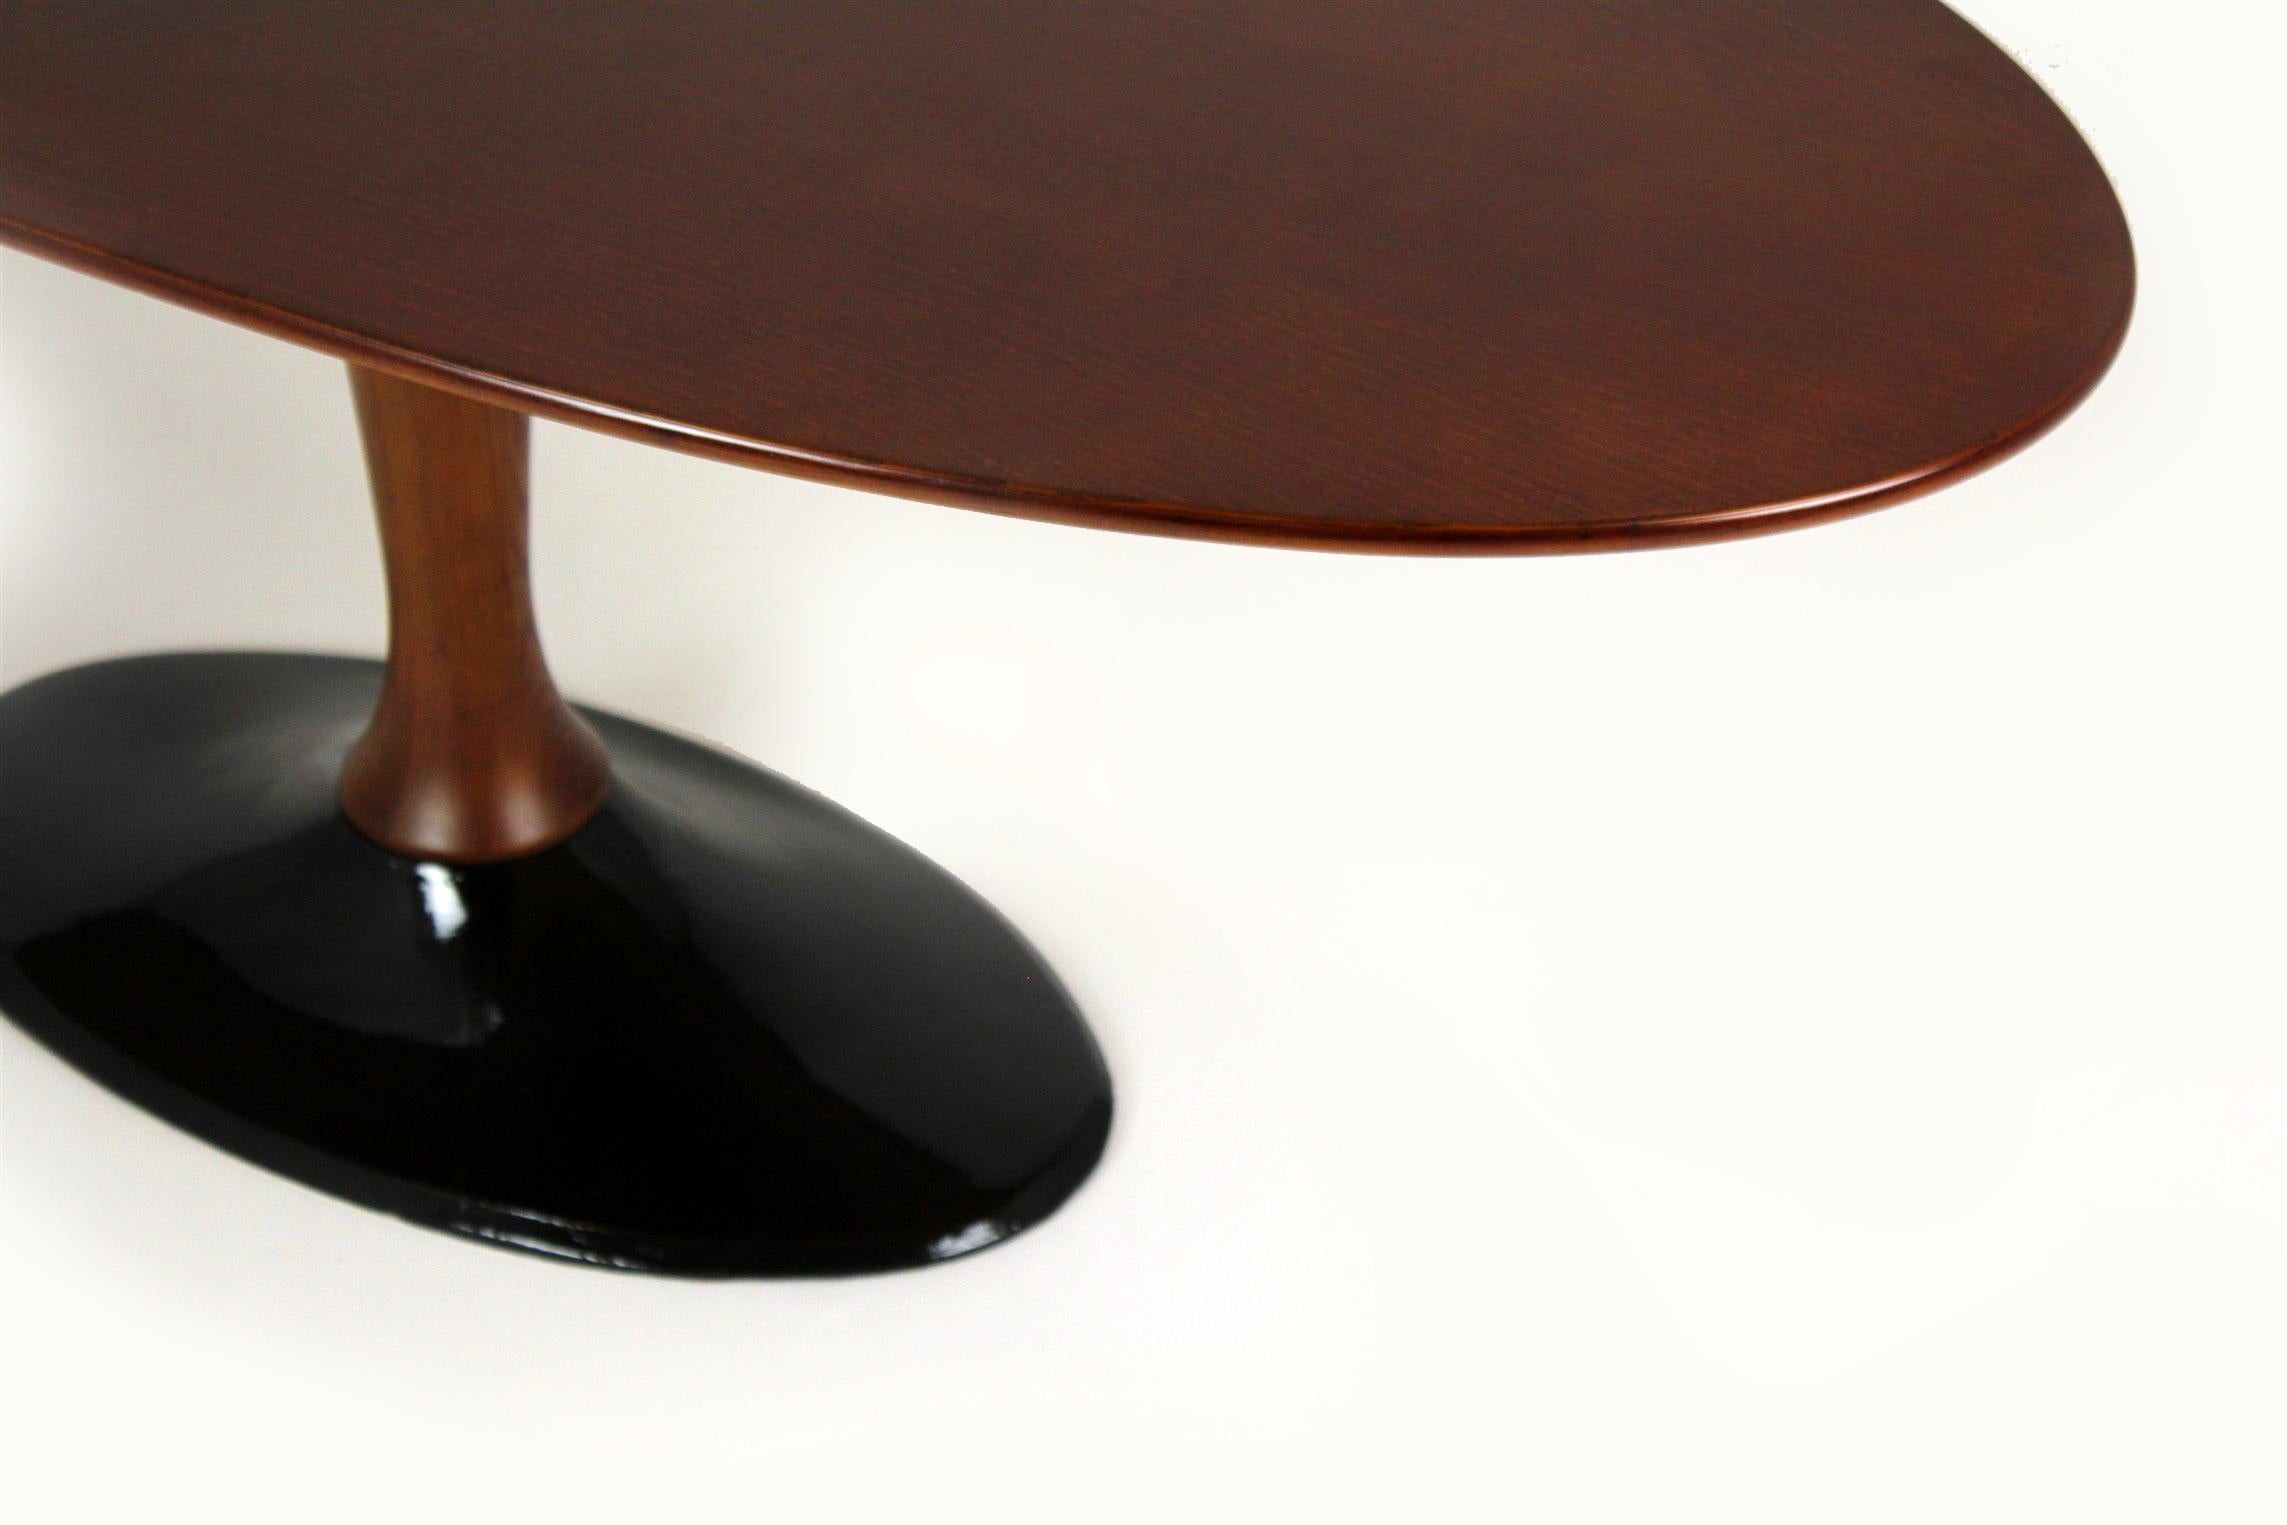 Restored Mid-Century Modern Oval Ash Coffee Table from Drevotvar, 1960s For Sale 6